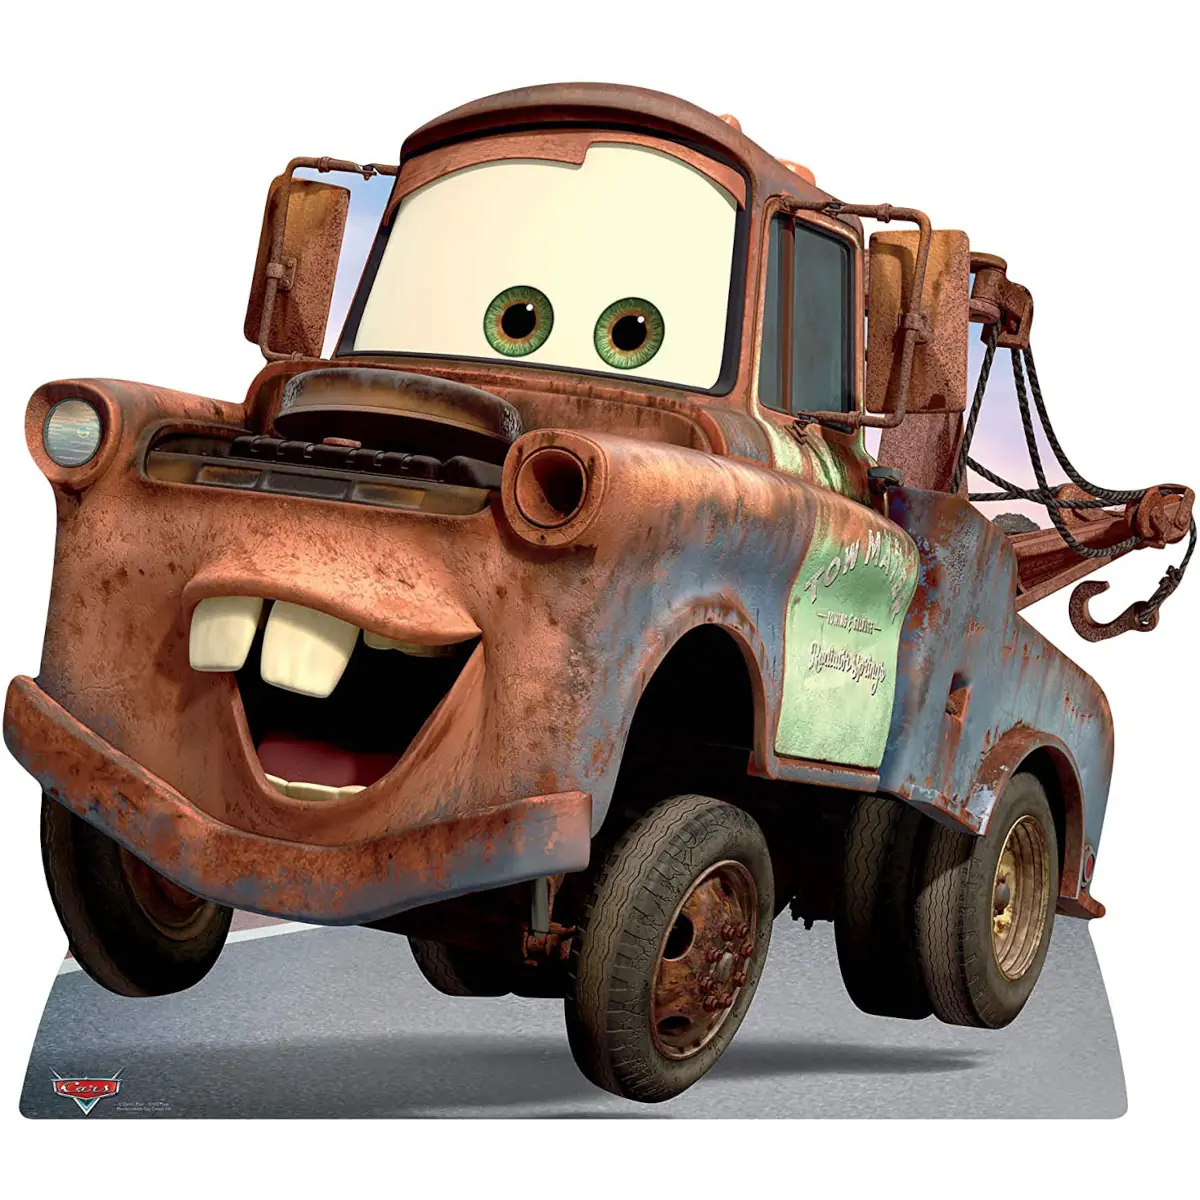 Tow Mater (Disney Pixar: Cars) Official Large Cardboard Cutout / Standee -  Cutouts and Collectables